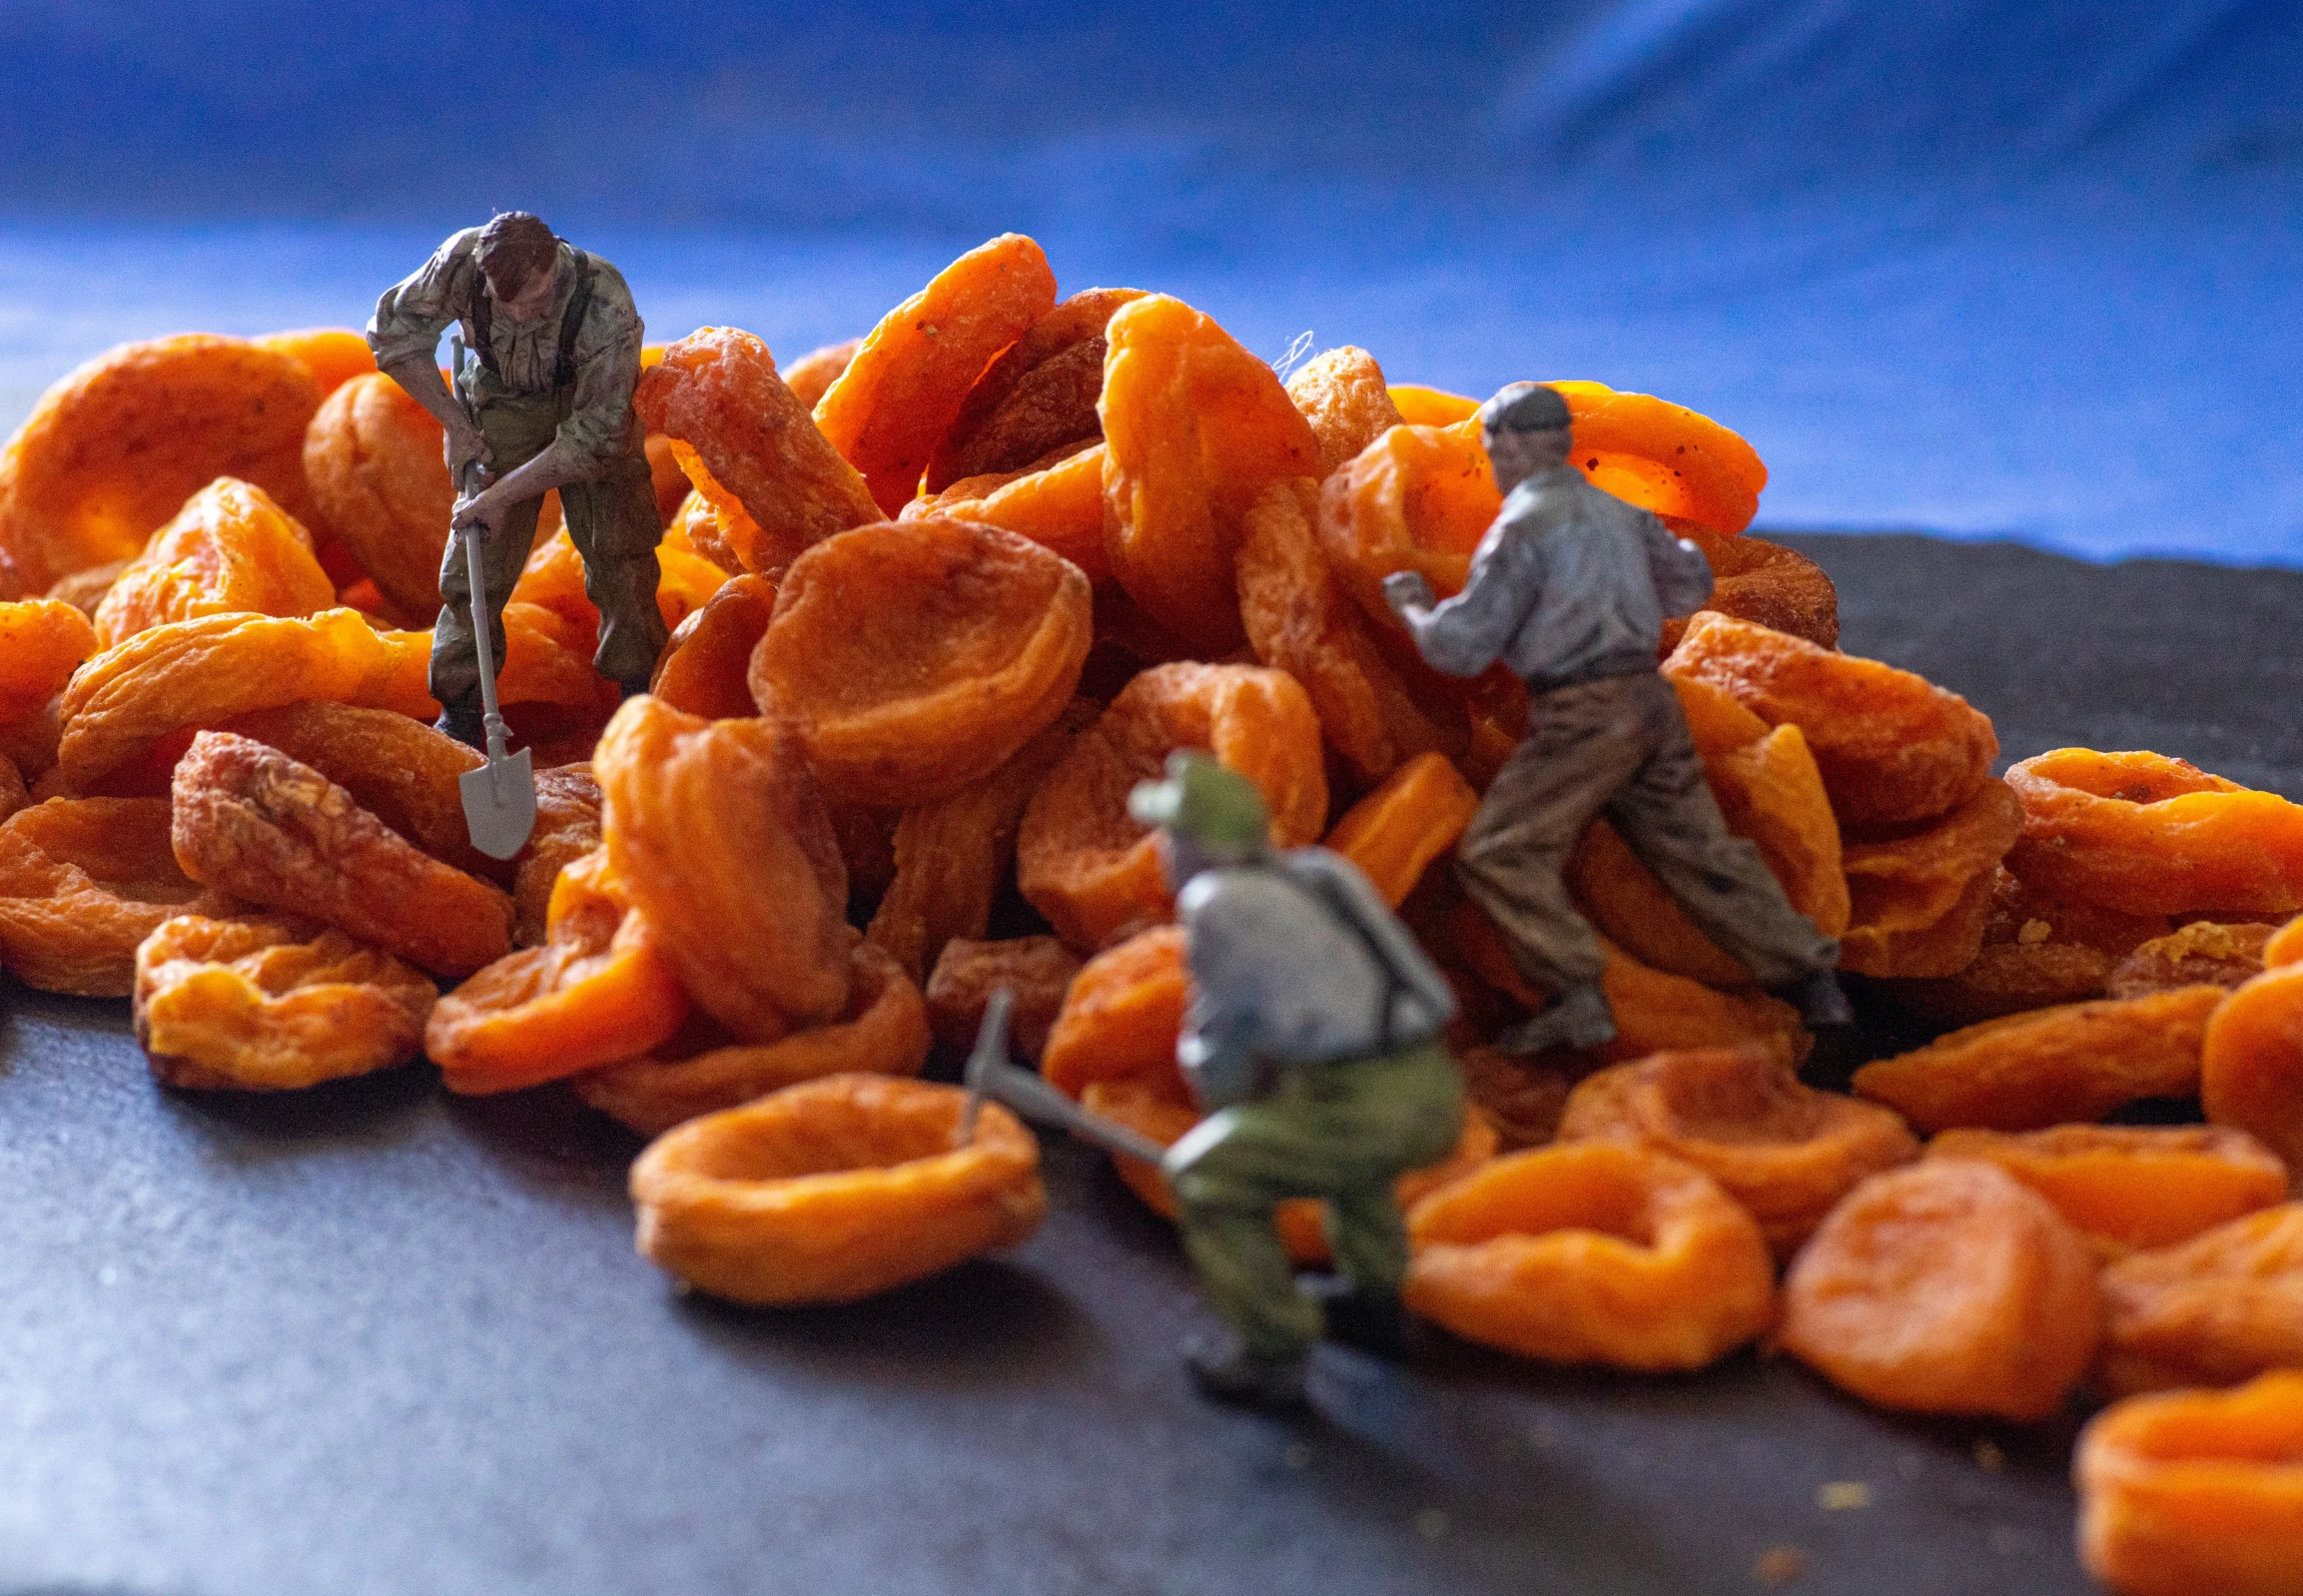 a pile of orange rings with toy soldiers standing near them